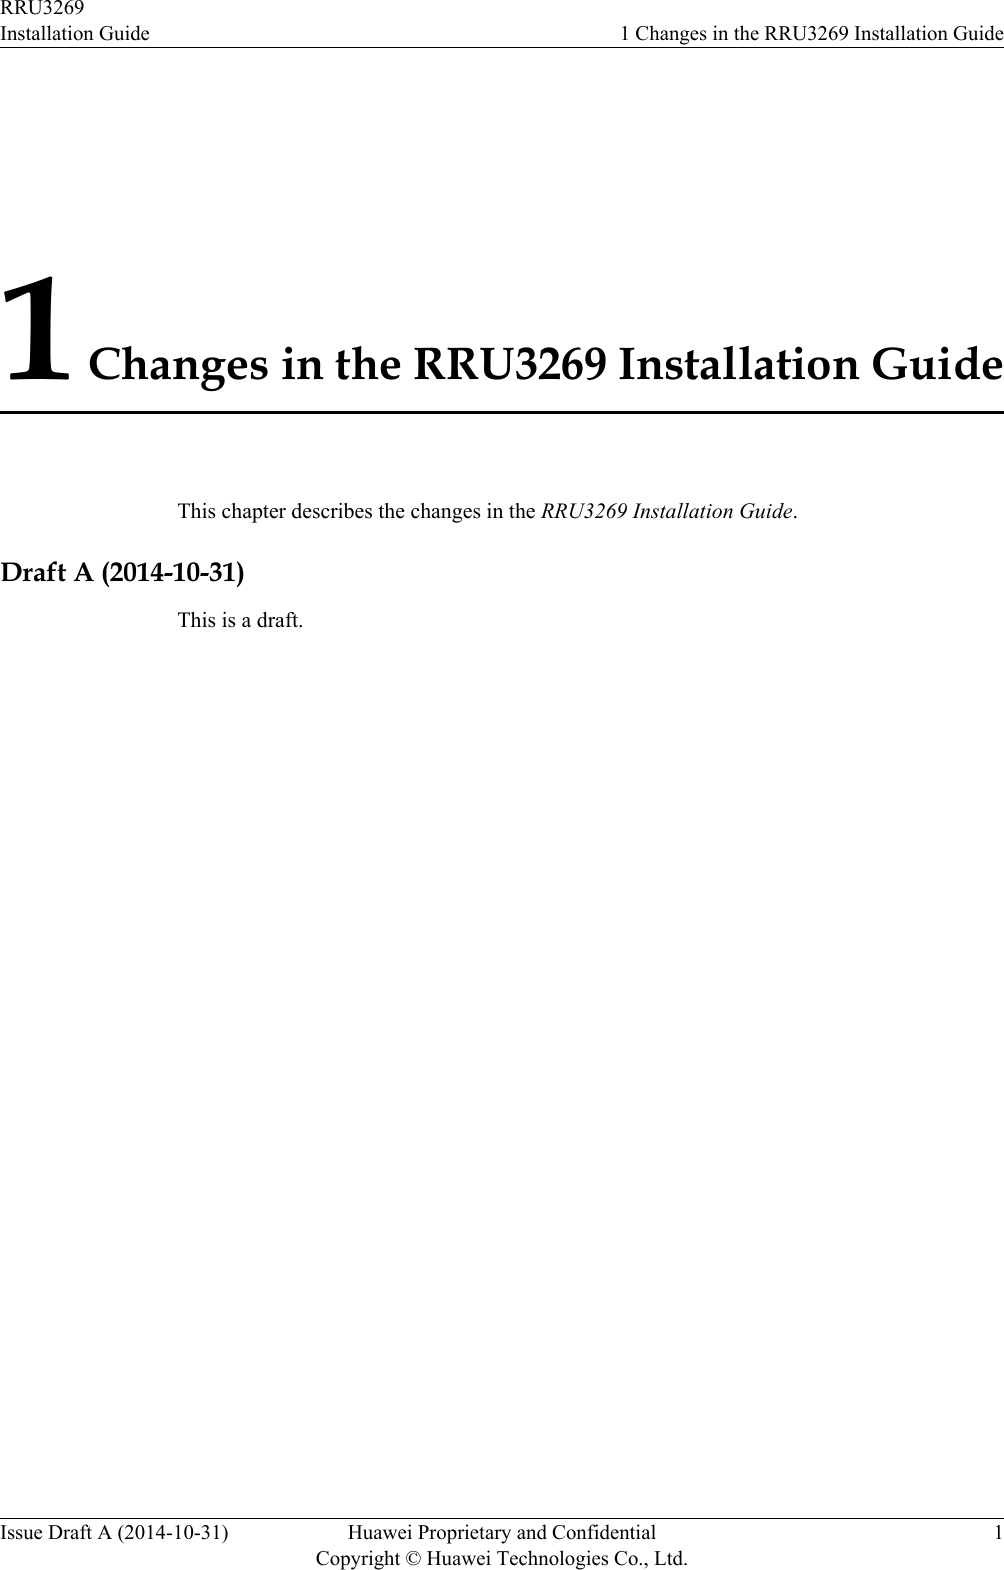 1 Changes in the RRU3269 Installation GuideThis chapter describes the changes in the RRU3269 Installation Guide.Draft A (2014-10-31)This is a draft.RRU3269Installation Guide 1 Changes in the RRU3269 Installation GuideIssue Draft A (2014-10-31) Huawei Proprietary and ConfidentialCopyright © Huawei Technologies Co., Ltd.1